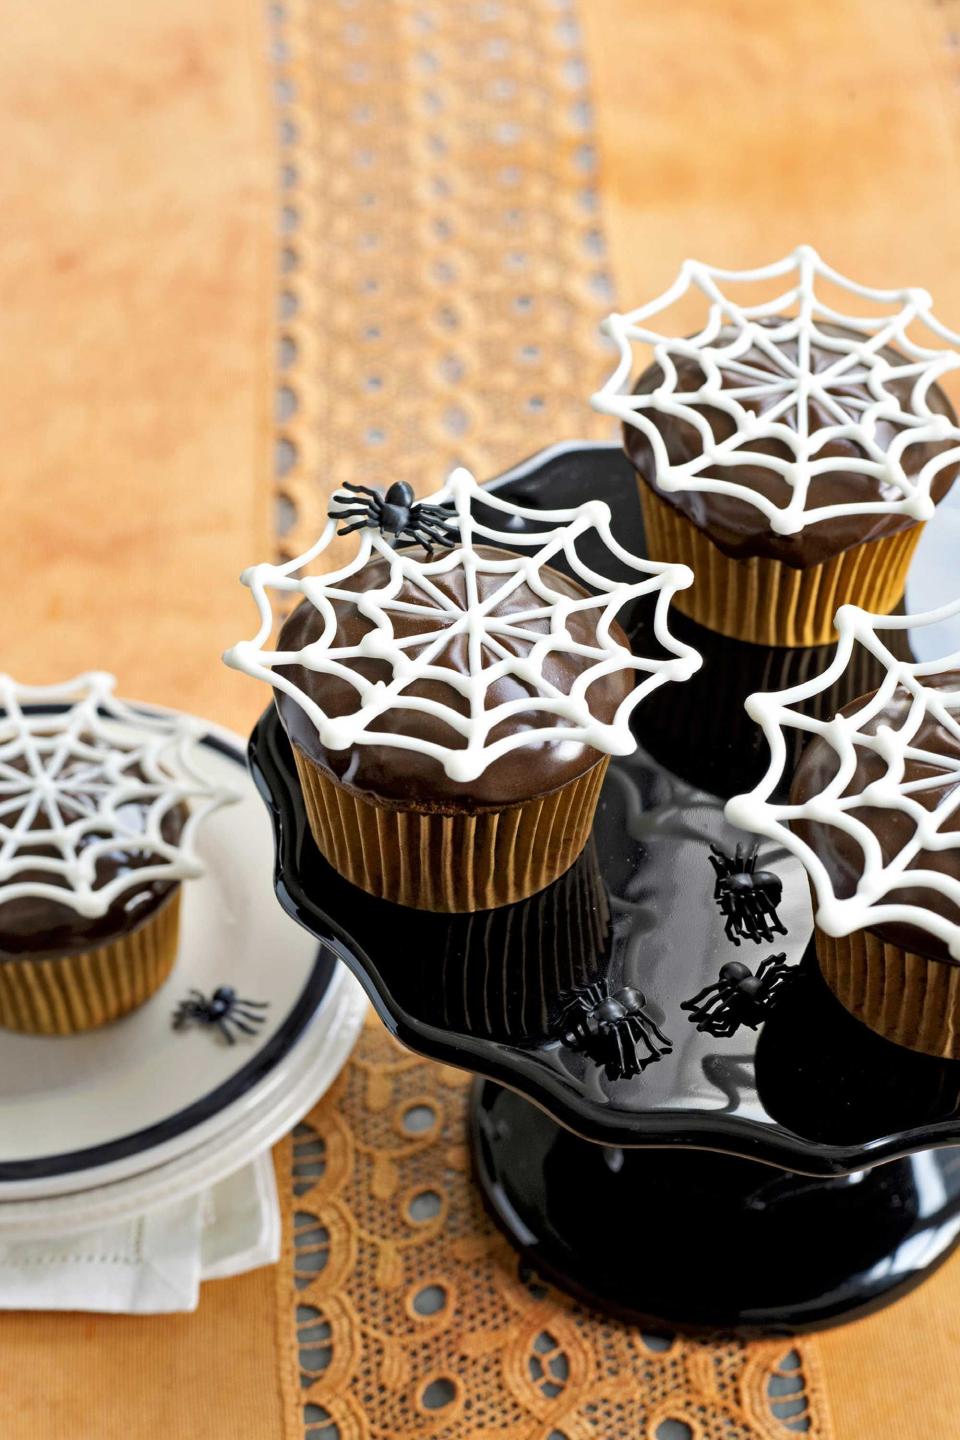 Set the Mood This October with these Fun, Easy Halloween Cupcake Ideas